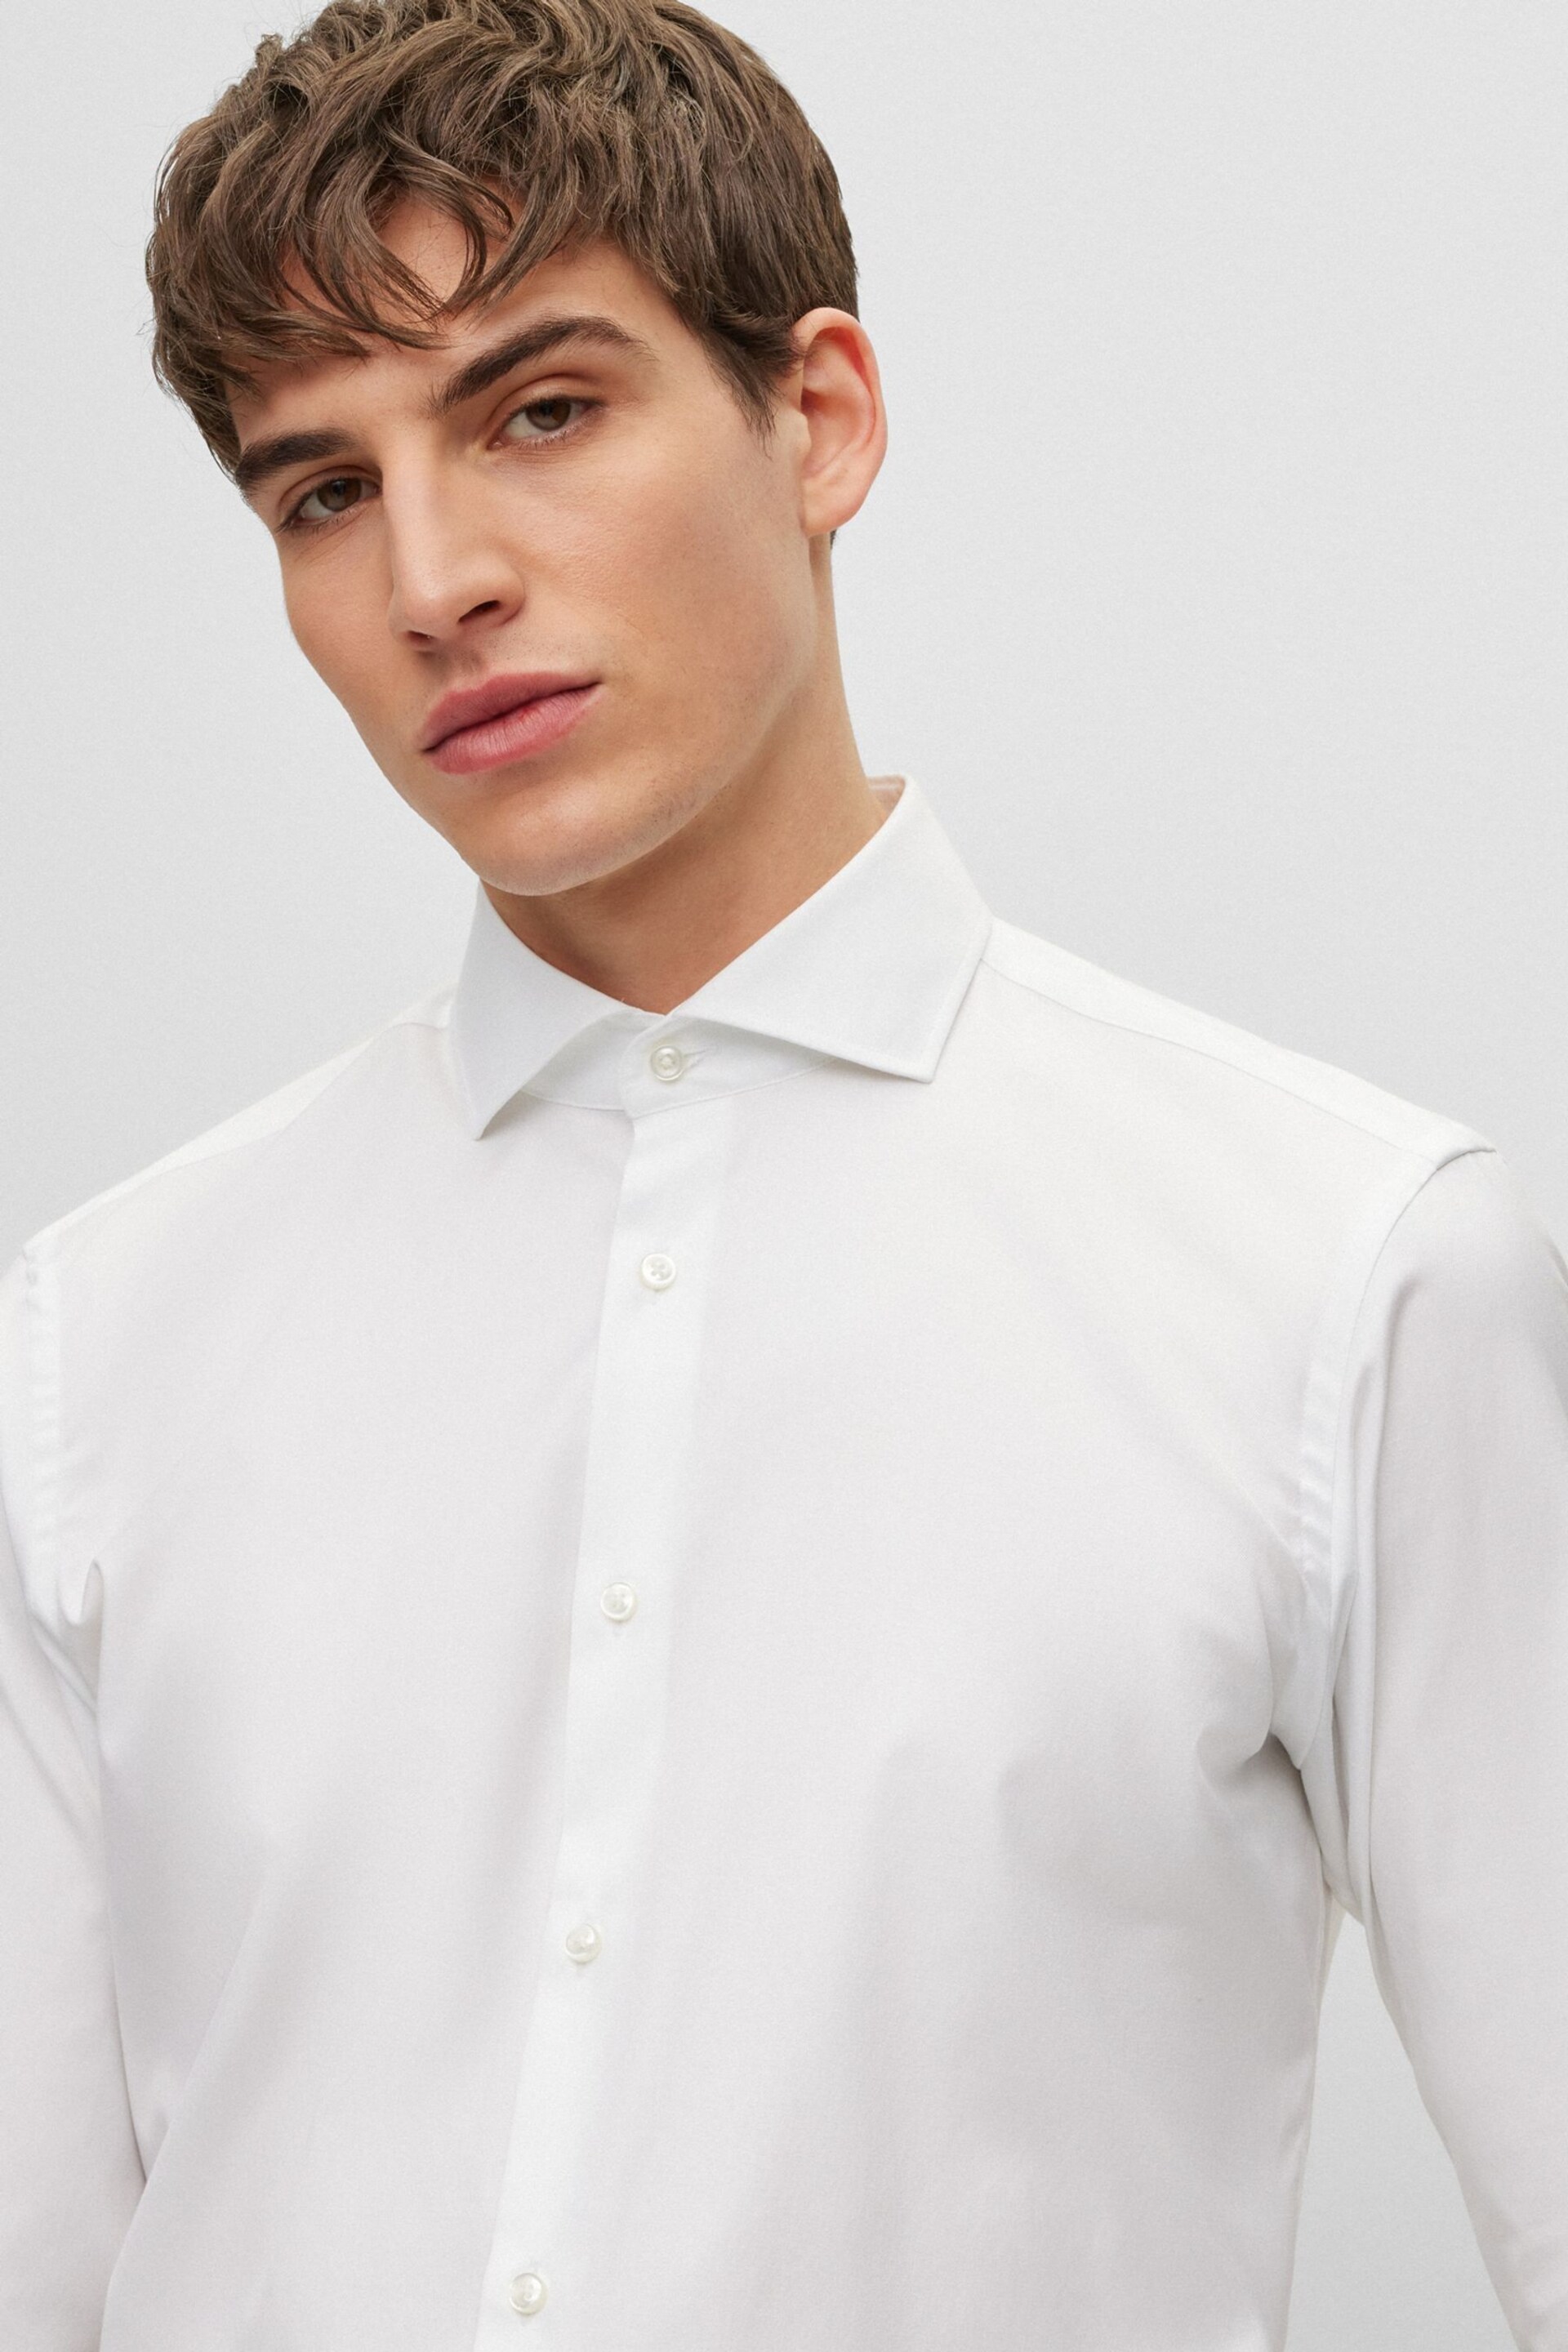 BOSS White Regular Fit Double Cuff Long Sleeve Shirt - Image 4 of 6